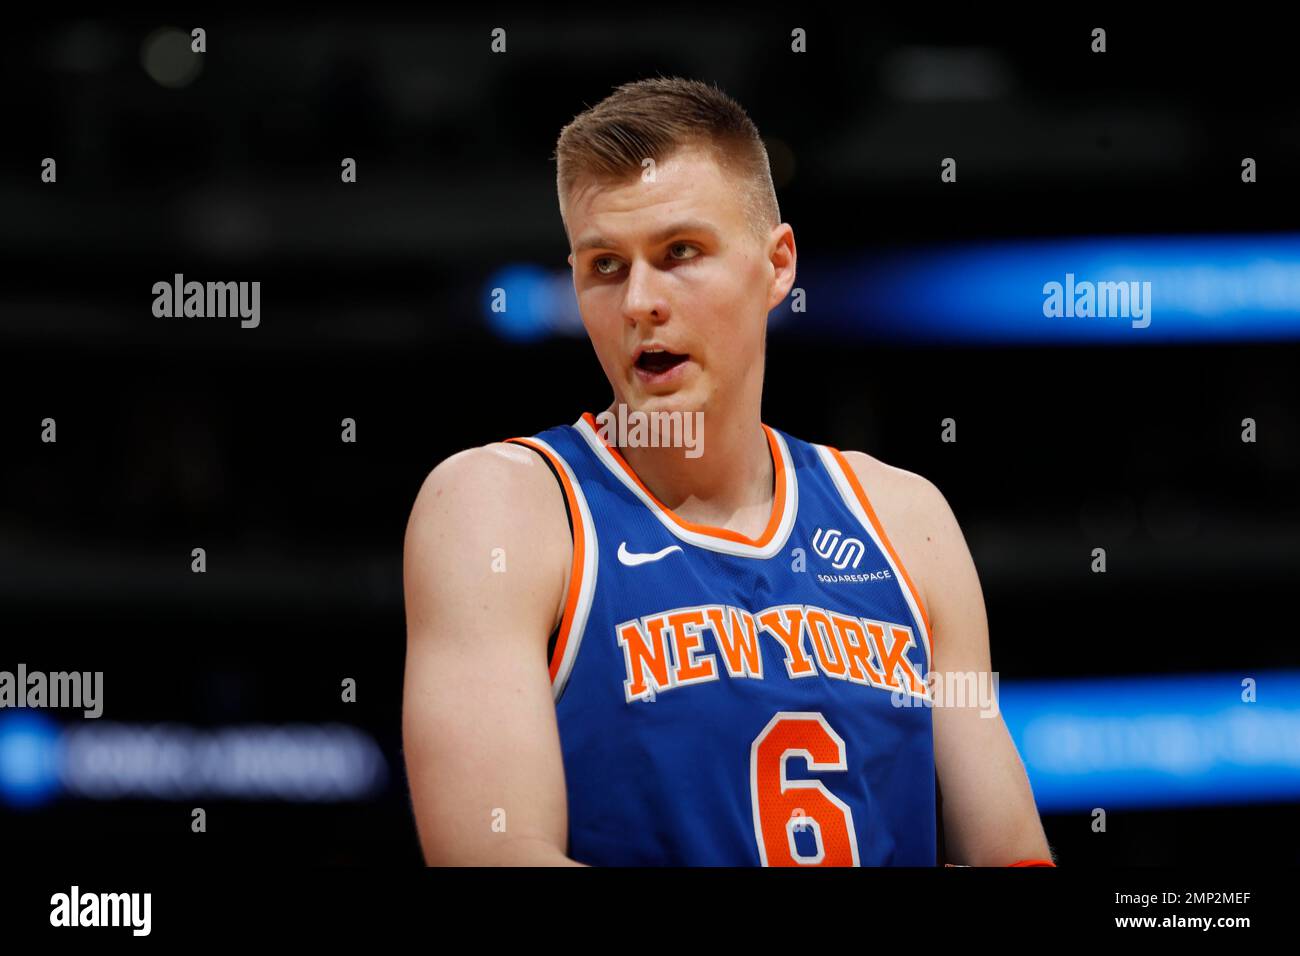 New York Knicks forward Kristaps Porzingis (6) in the second half of an NBA basketball game Thursday, Jan. 25, 2018, in Denver. The Nuggets won 130-118. (AP Photo/David Zalubowski) Banque D'Images